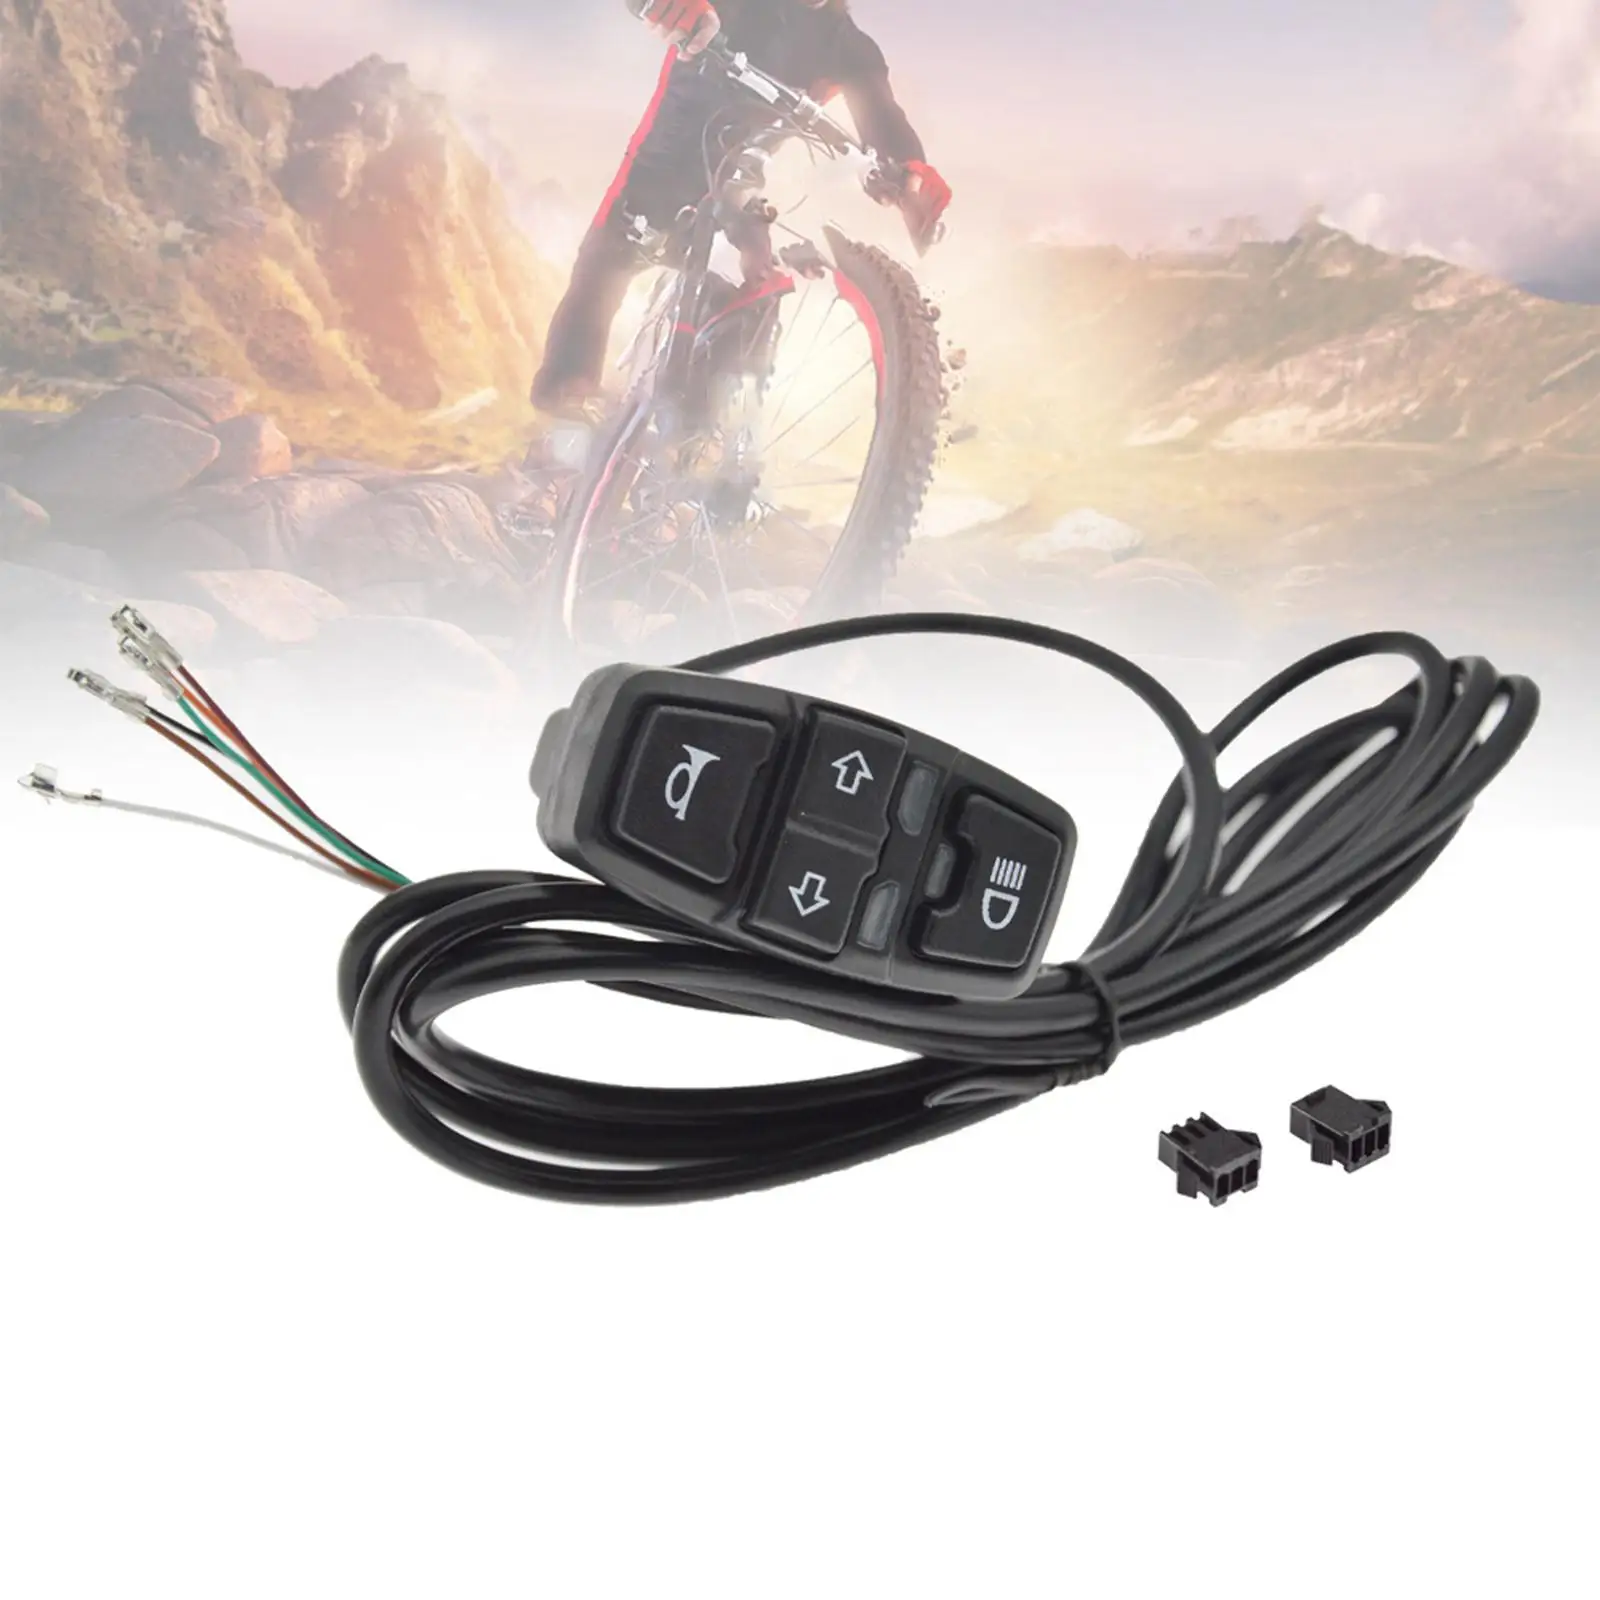 Frontlight Horn  Turning Light Switch, Bike Handlebar   Light Button Switch 6 Wire Connection for Motorcycle Mountain Bike